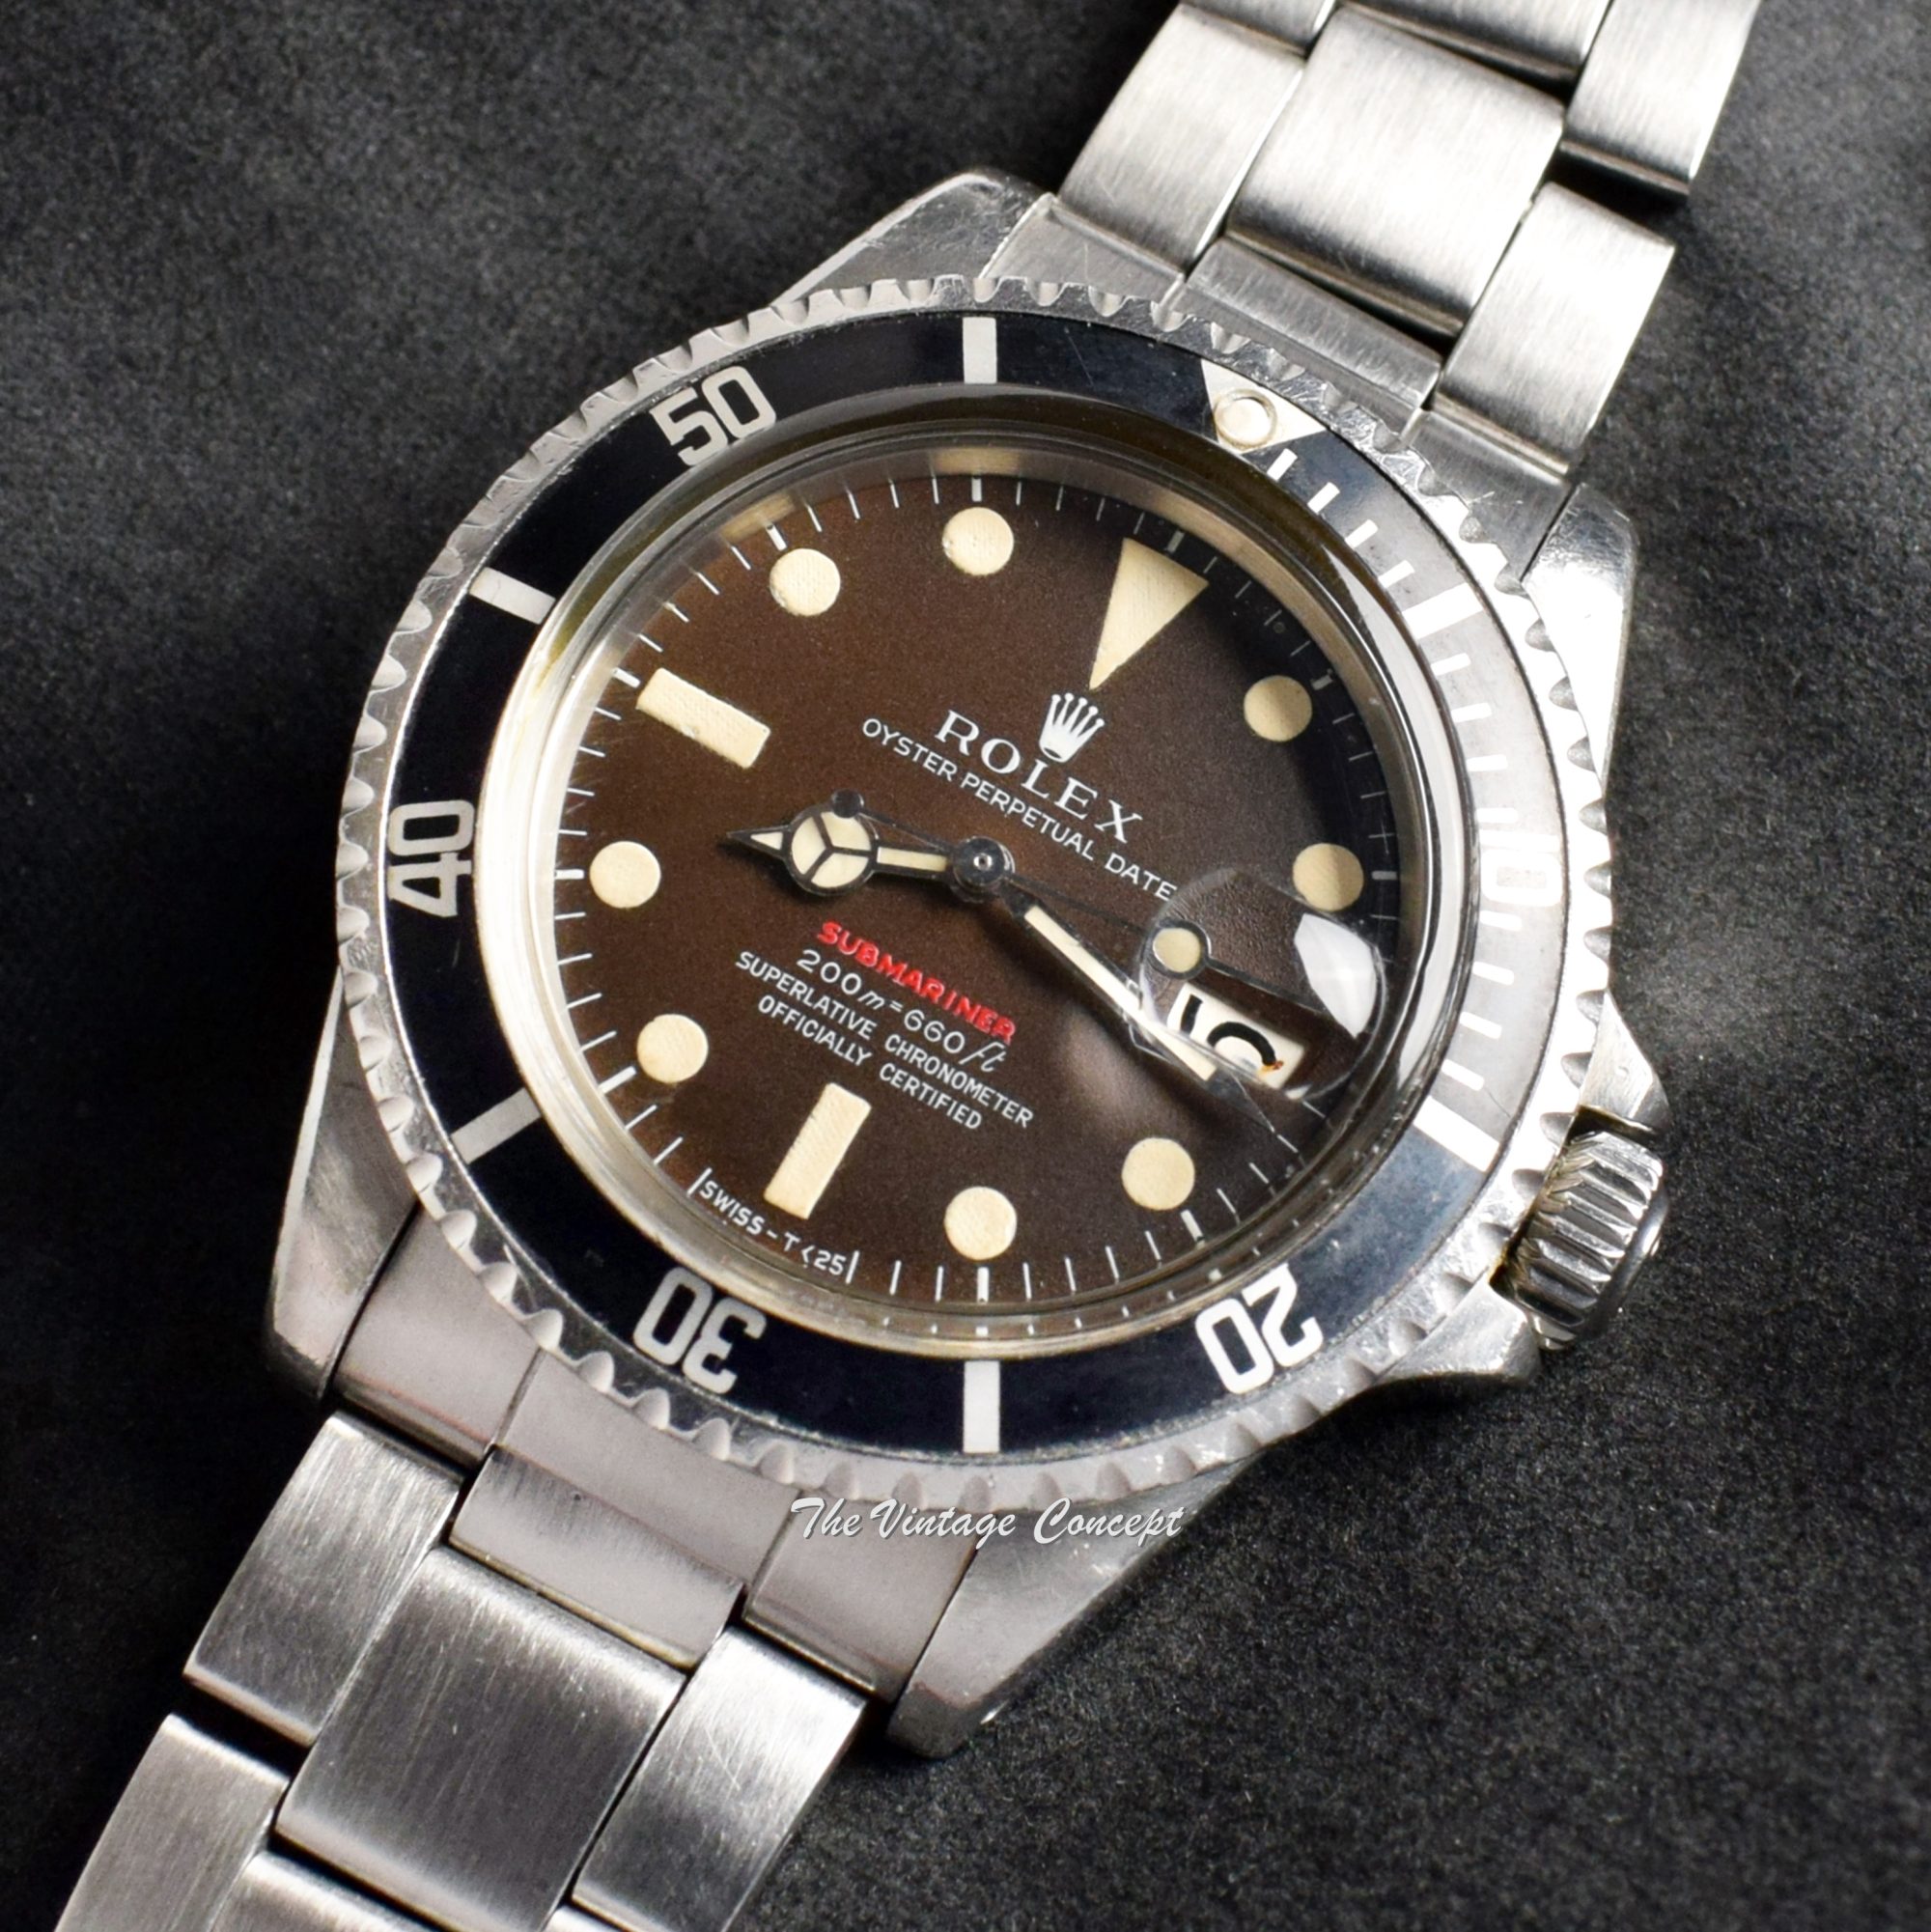 Rolex Submariner Single Red MK II Tropical Dial 1680 - The Vintage Concept